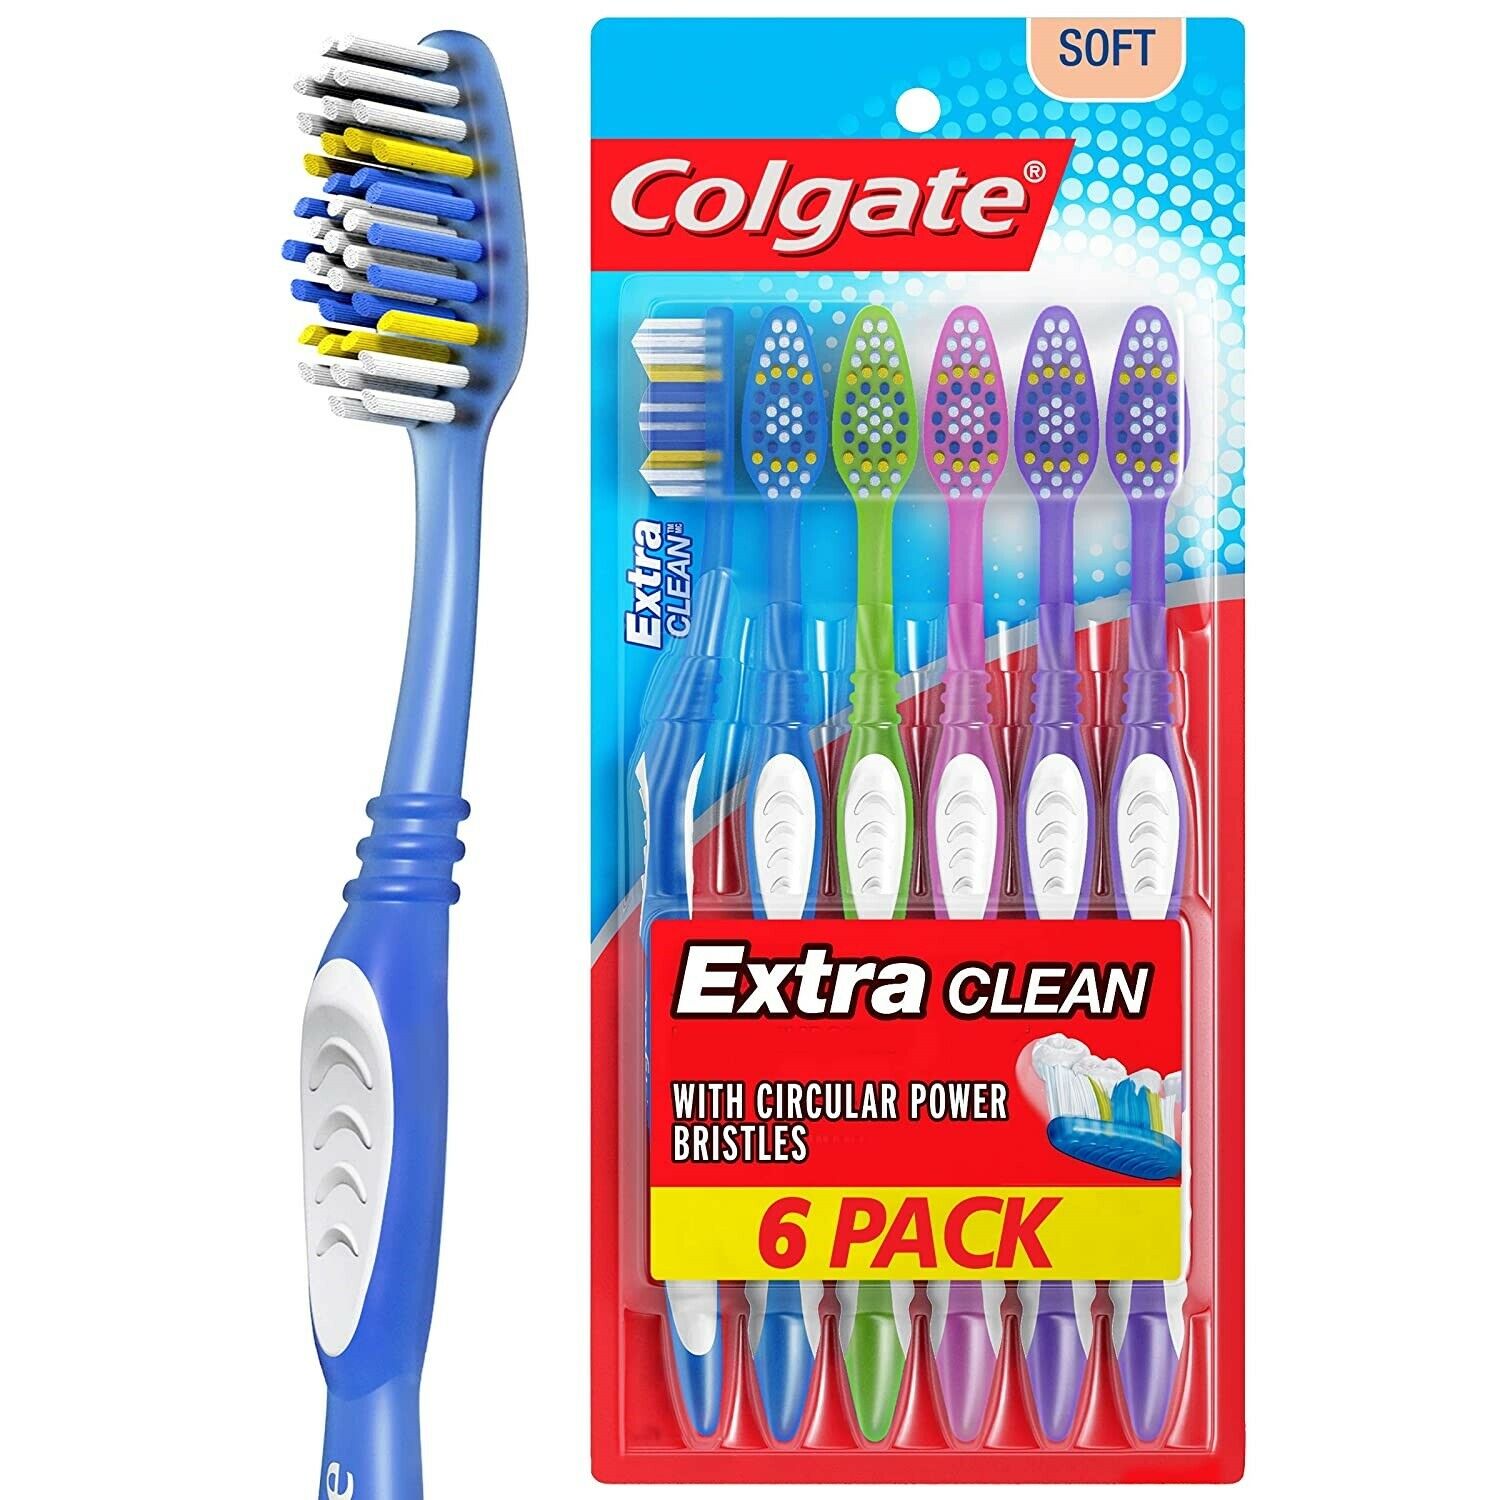 Colgate Extra Clean Toothbrush, Full Head, Soft (6 Count)